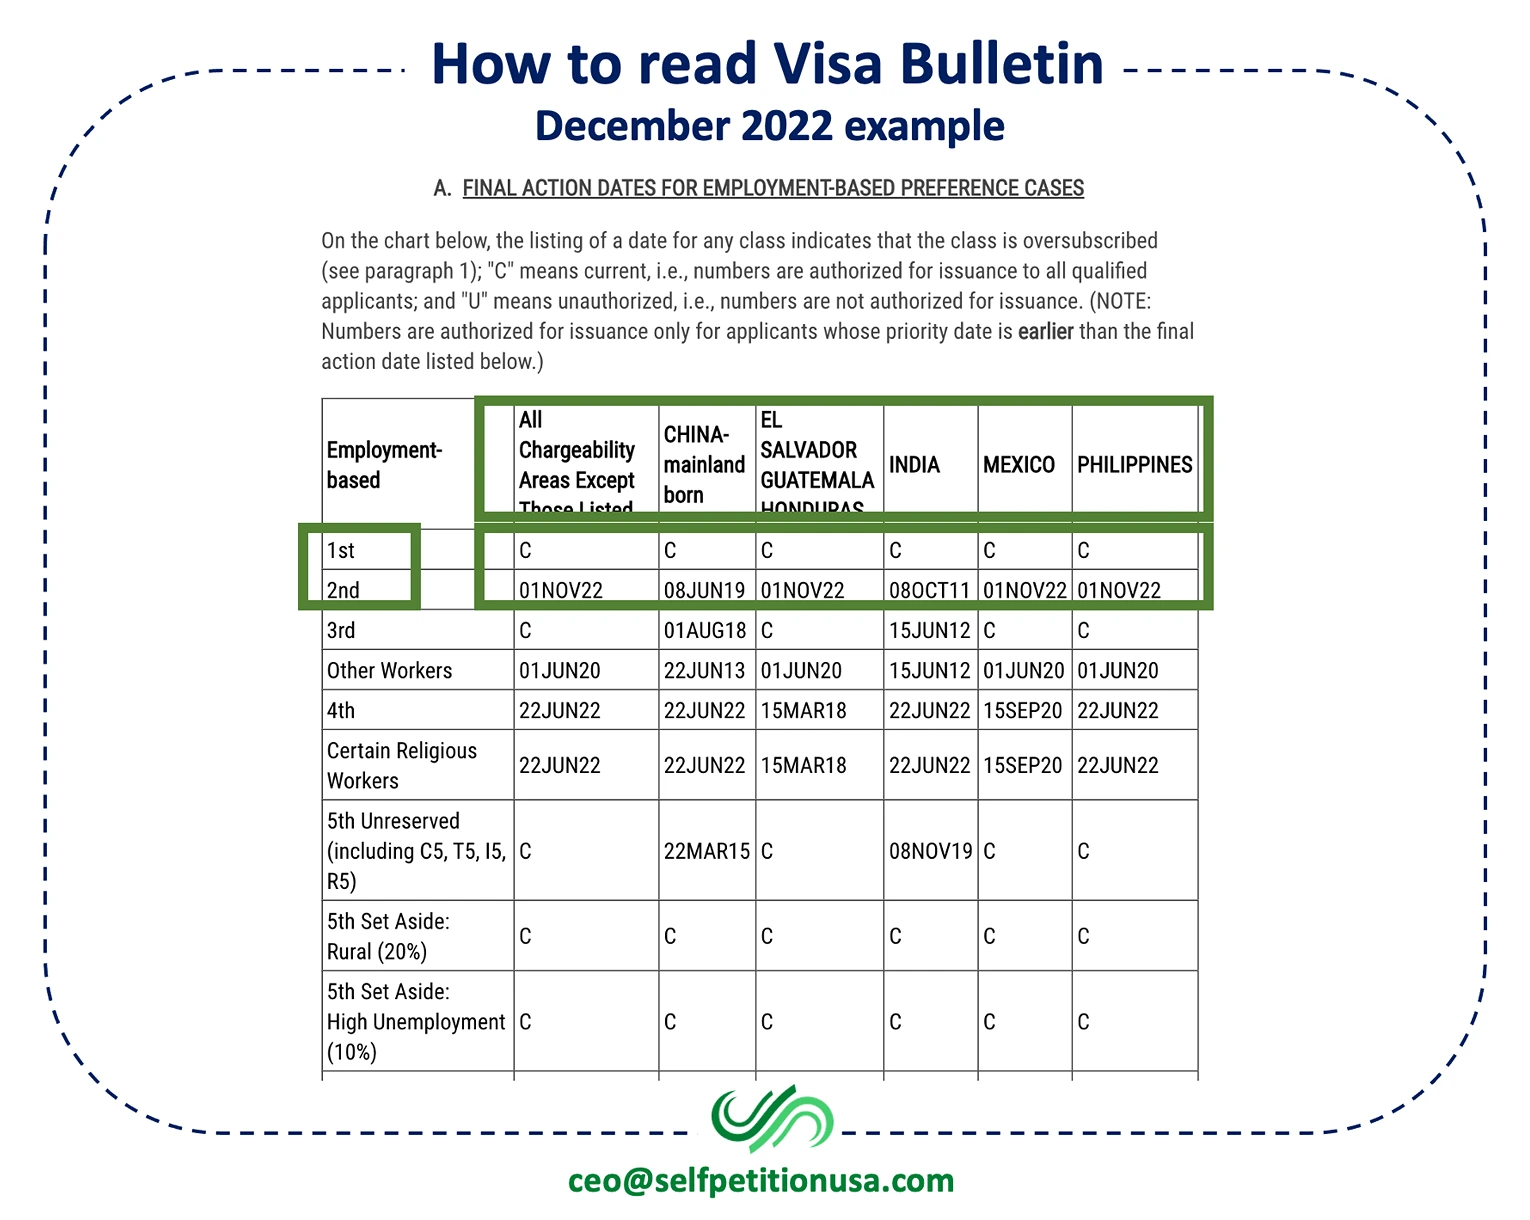 How to get EB2 Visa as Product Manager